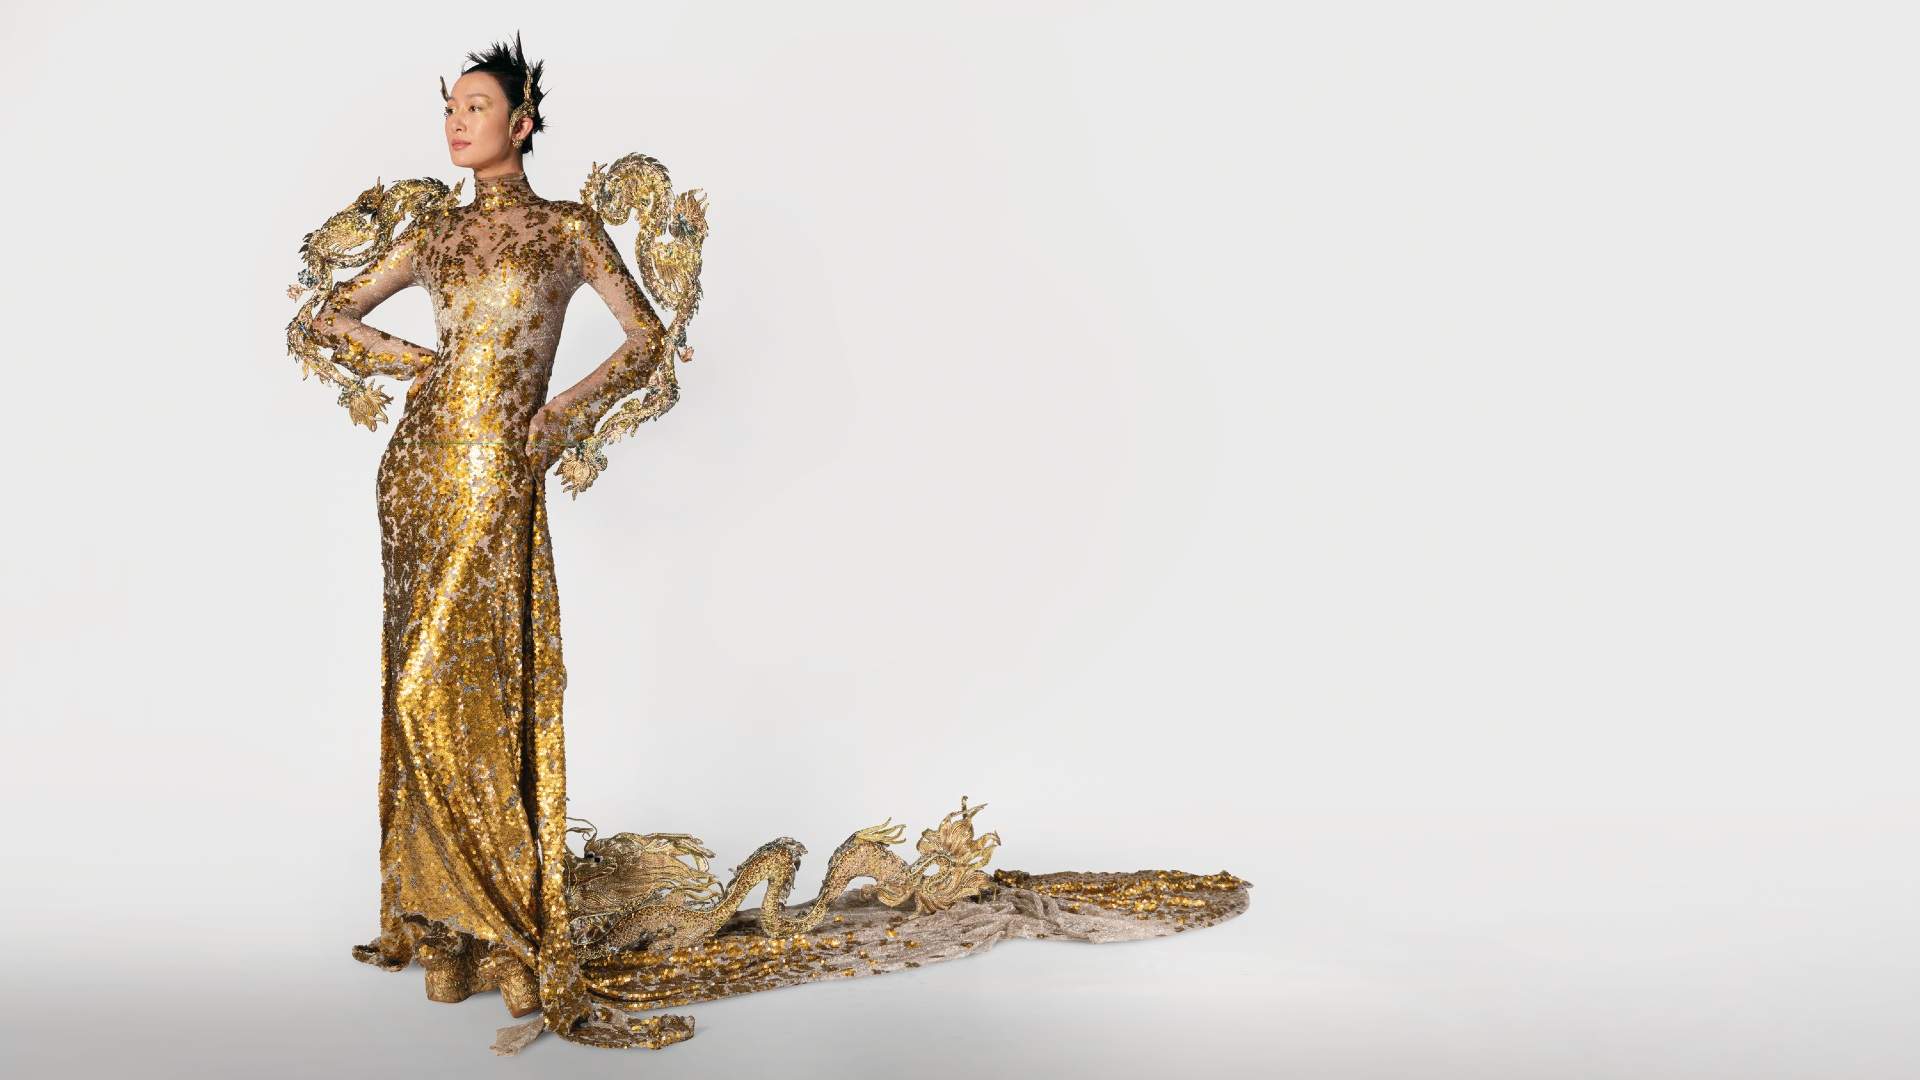 Auckland Art Gallery's Stunning New Exhibition Focuses on World-Renowned Couture Designer Guo Pei